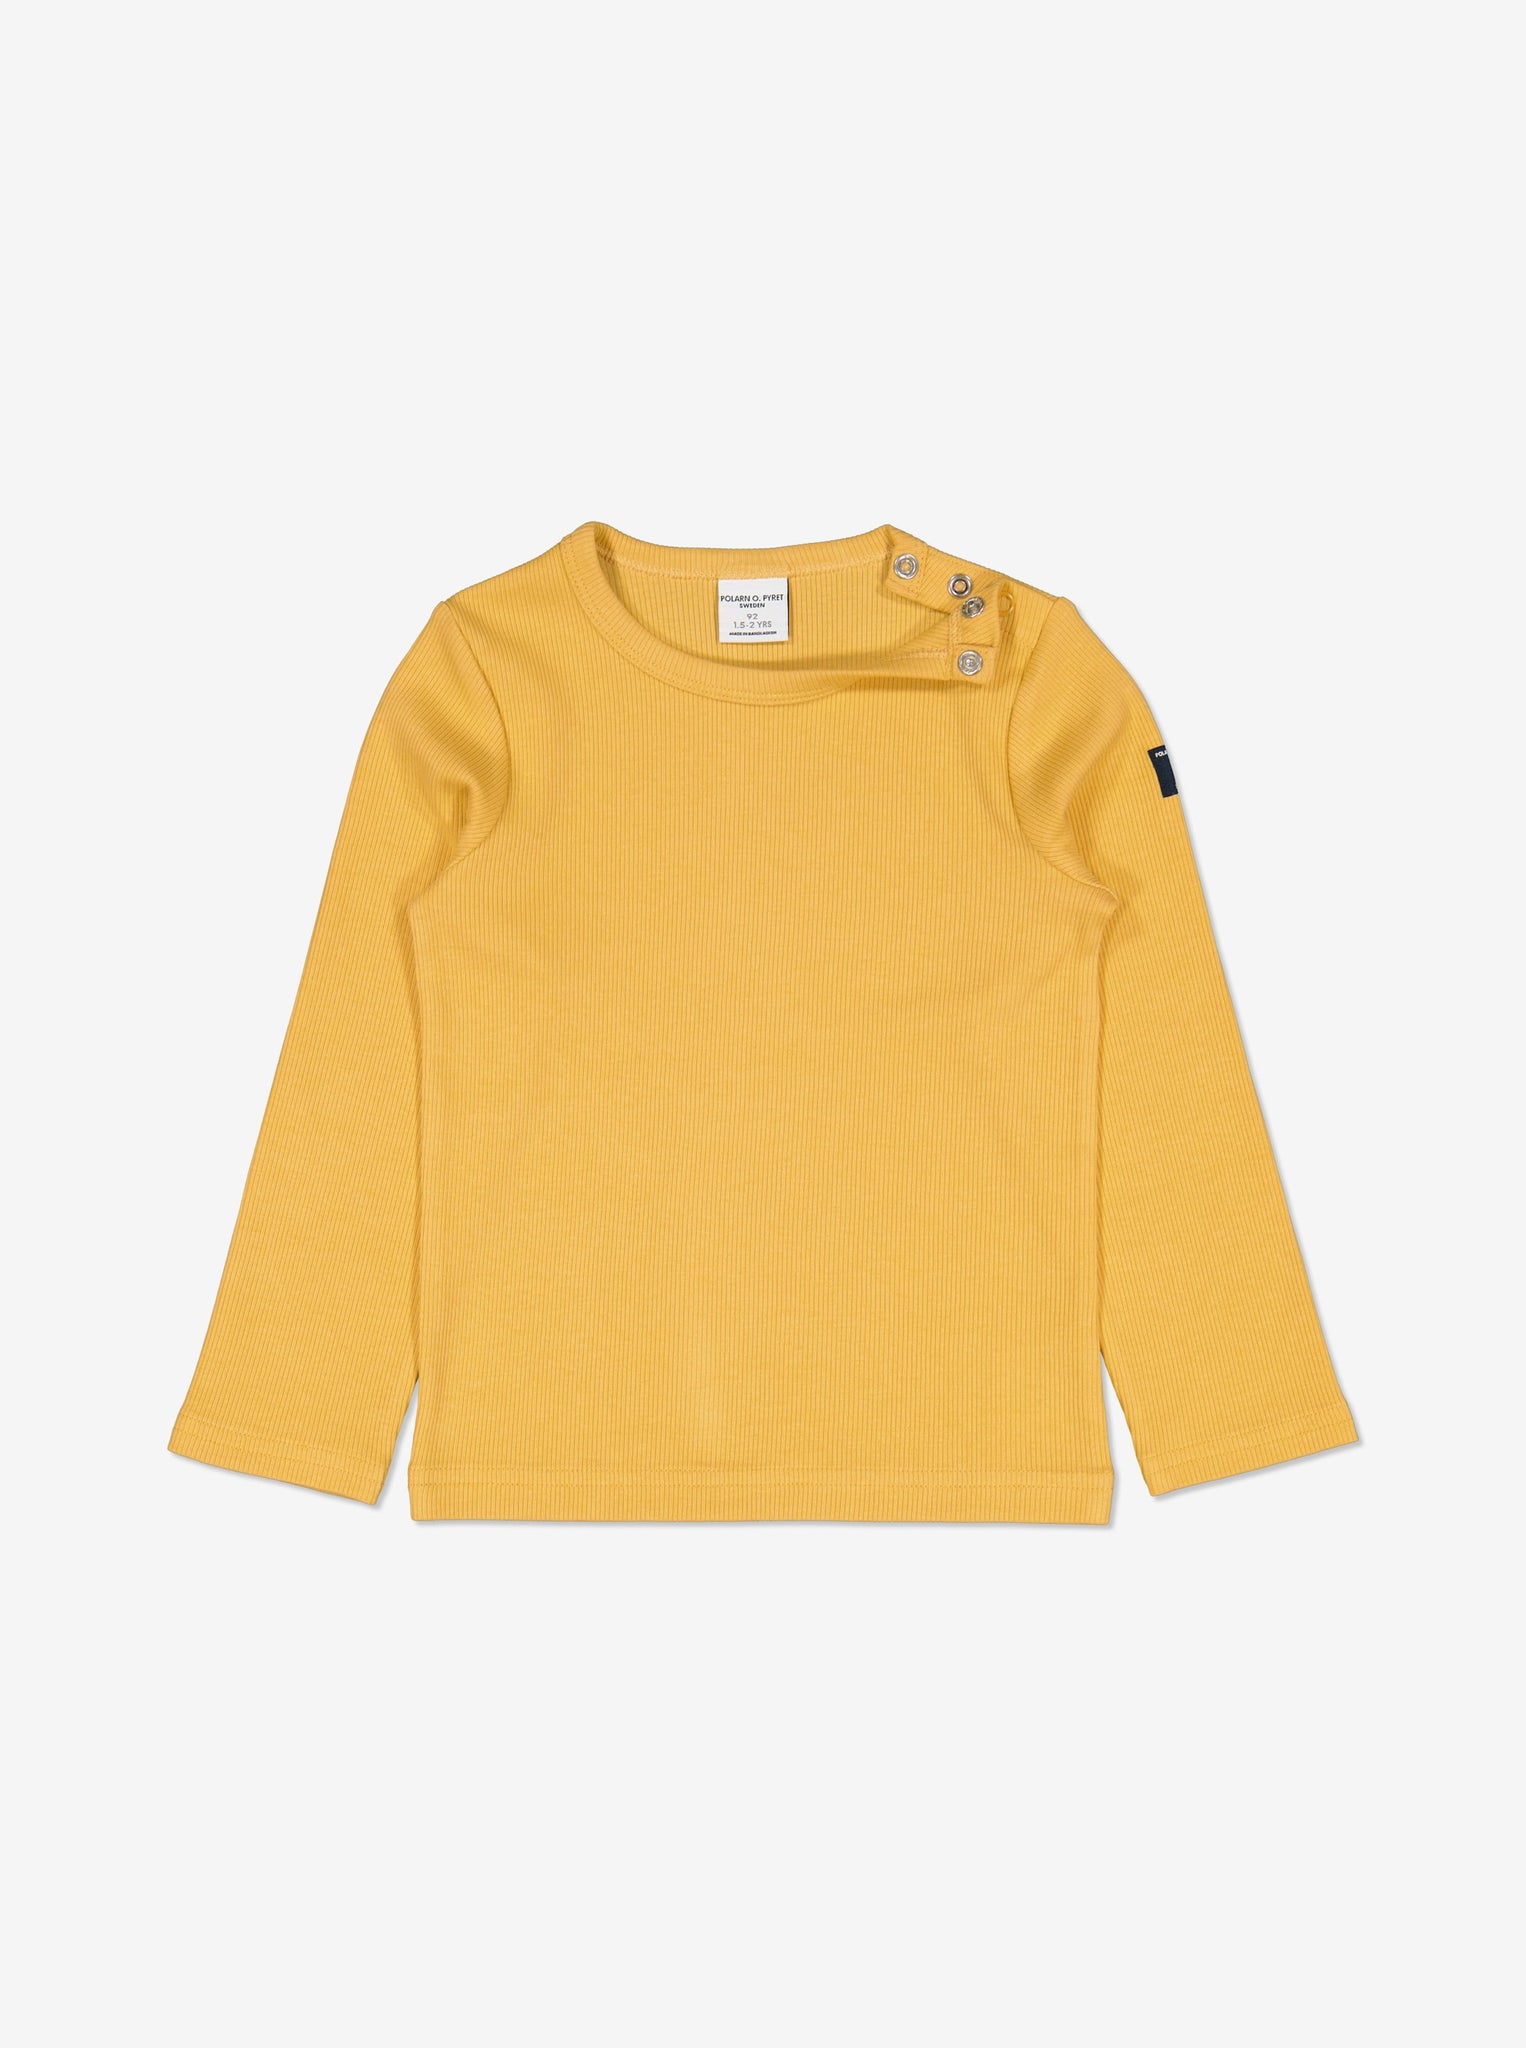  Organic Yellow Kids Top from Polarn O. Pyret Kidswear. Made from sustainable materials.